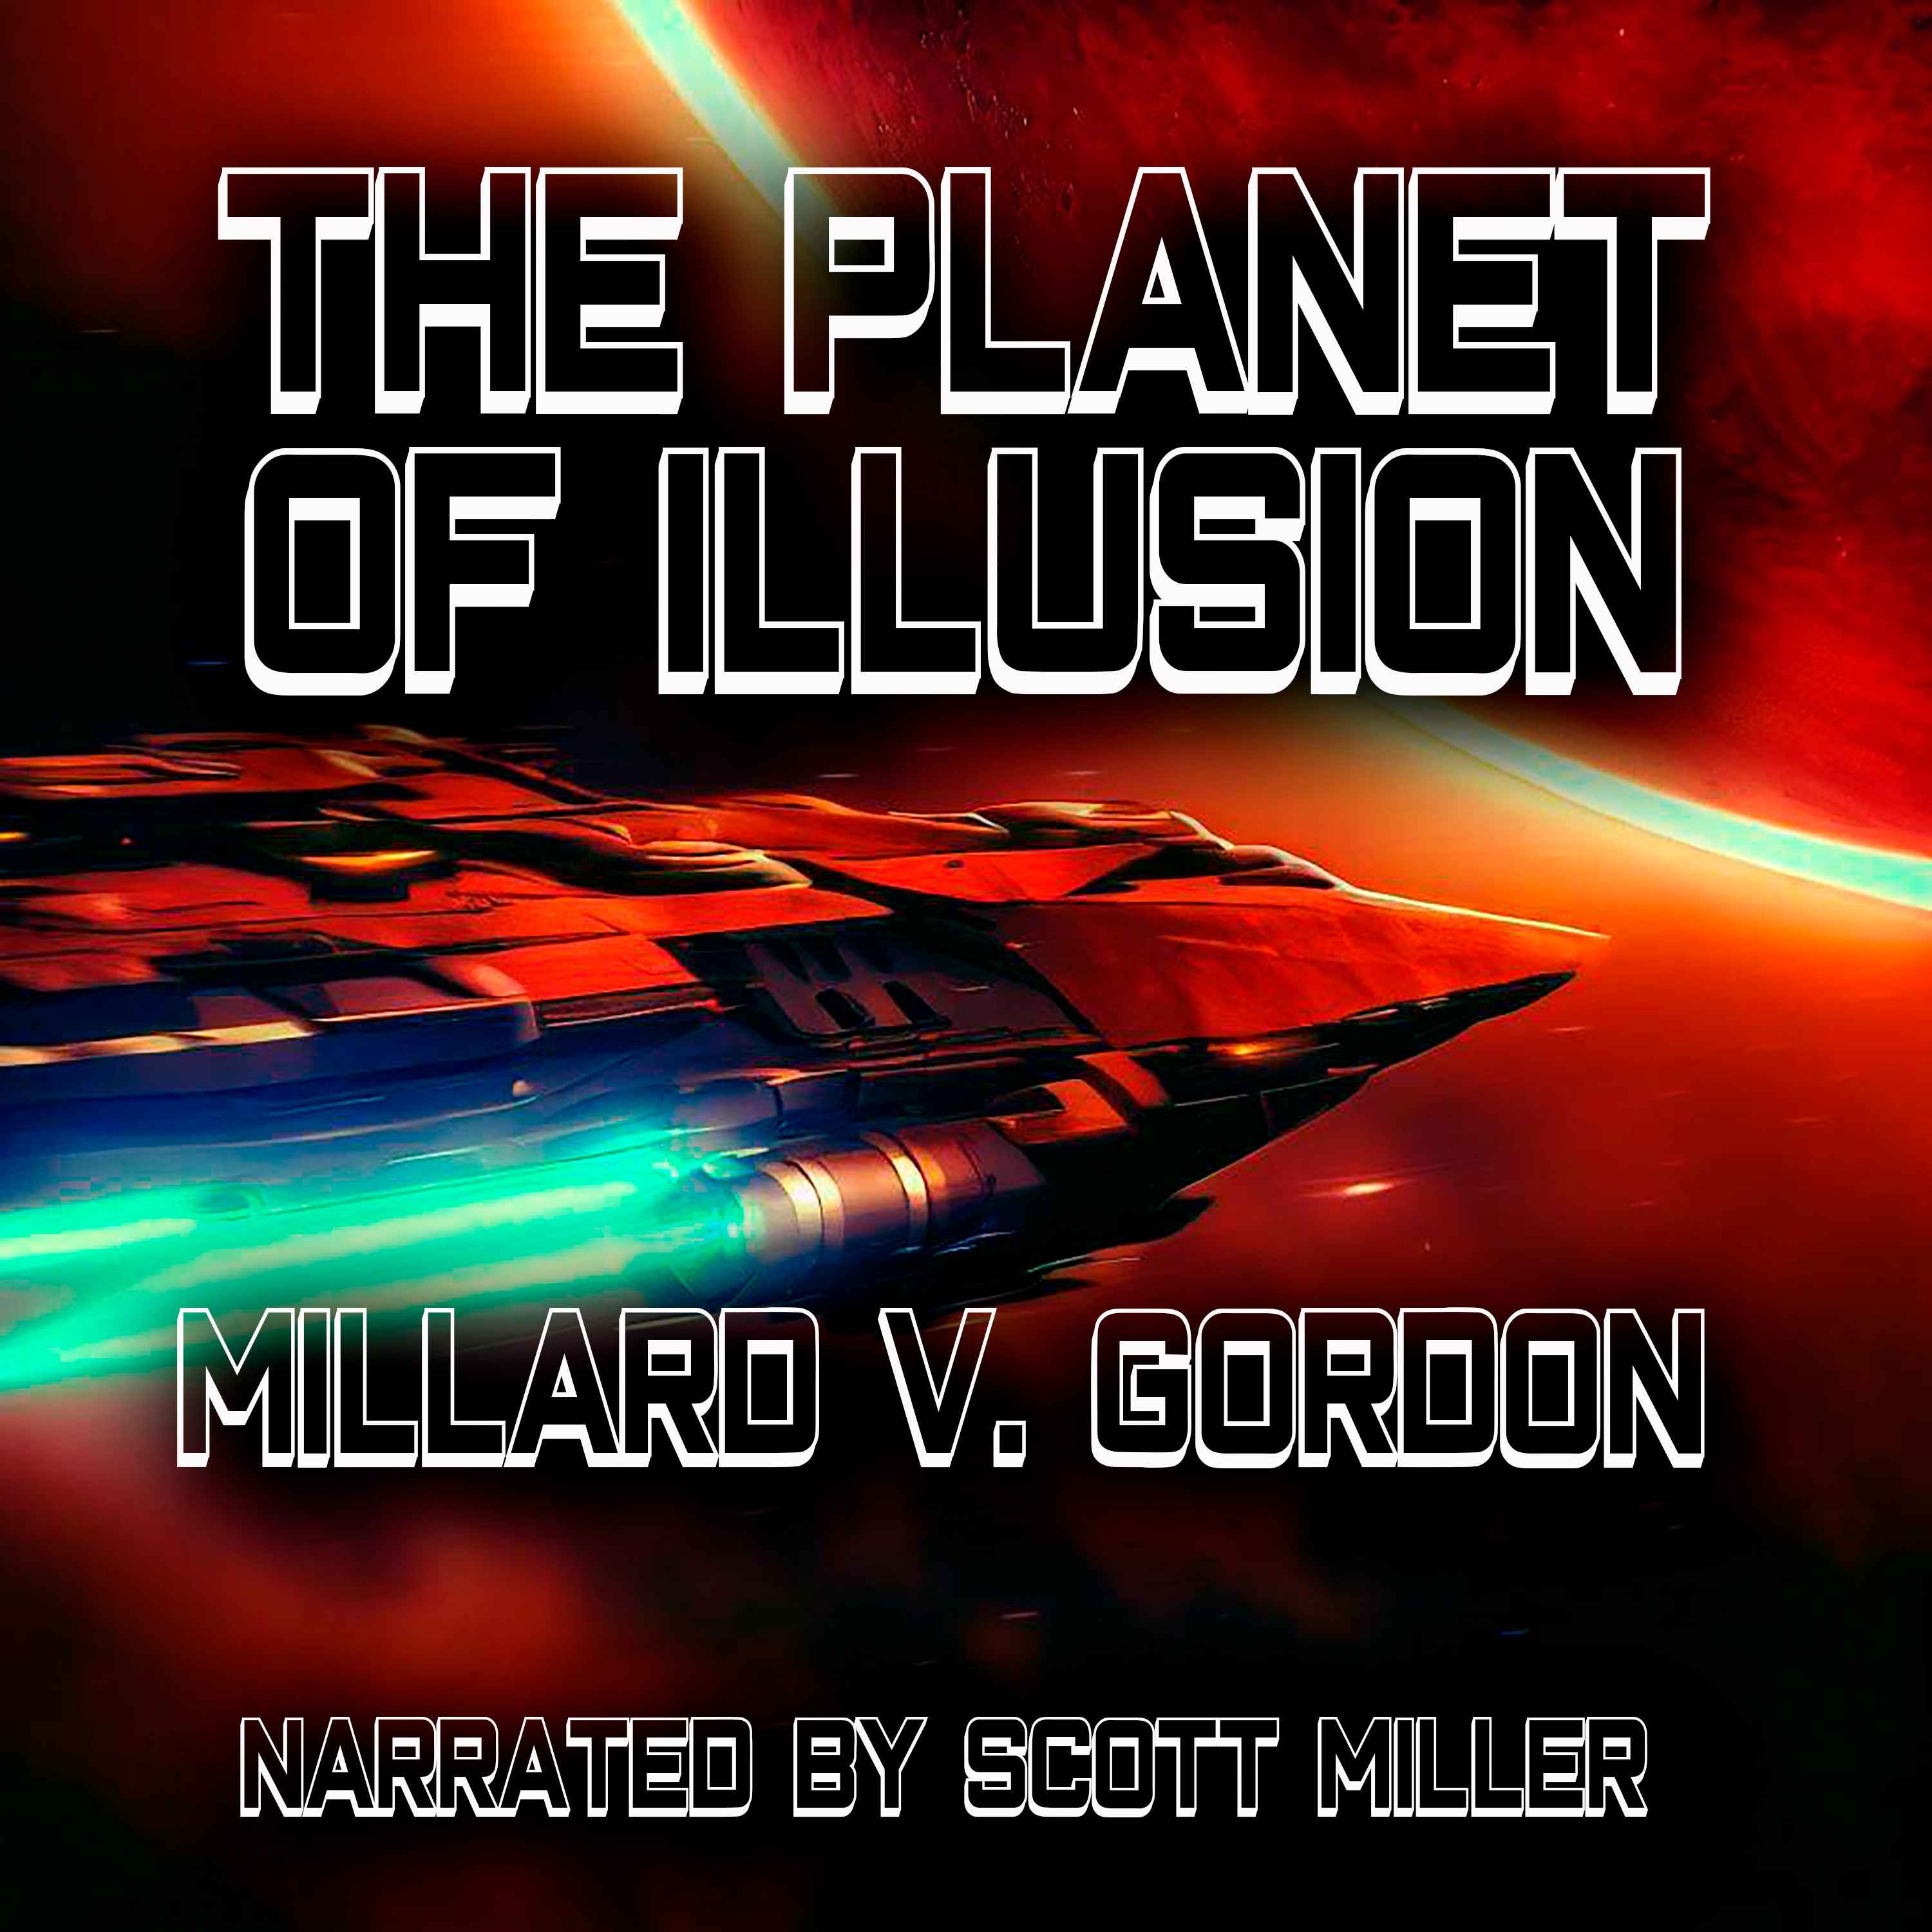 The Planet of Illusion by Donald A. Wollheim - Short Sci Fi Story From the 1940s